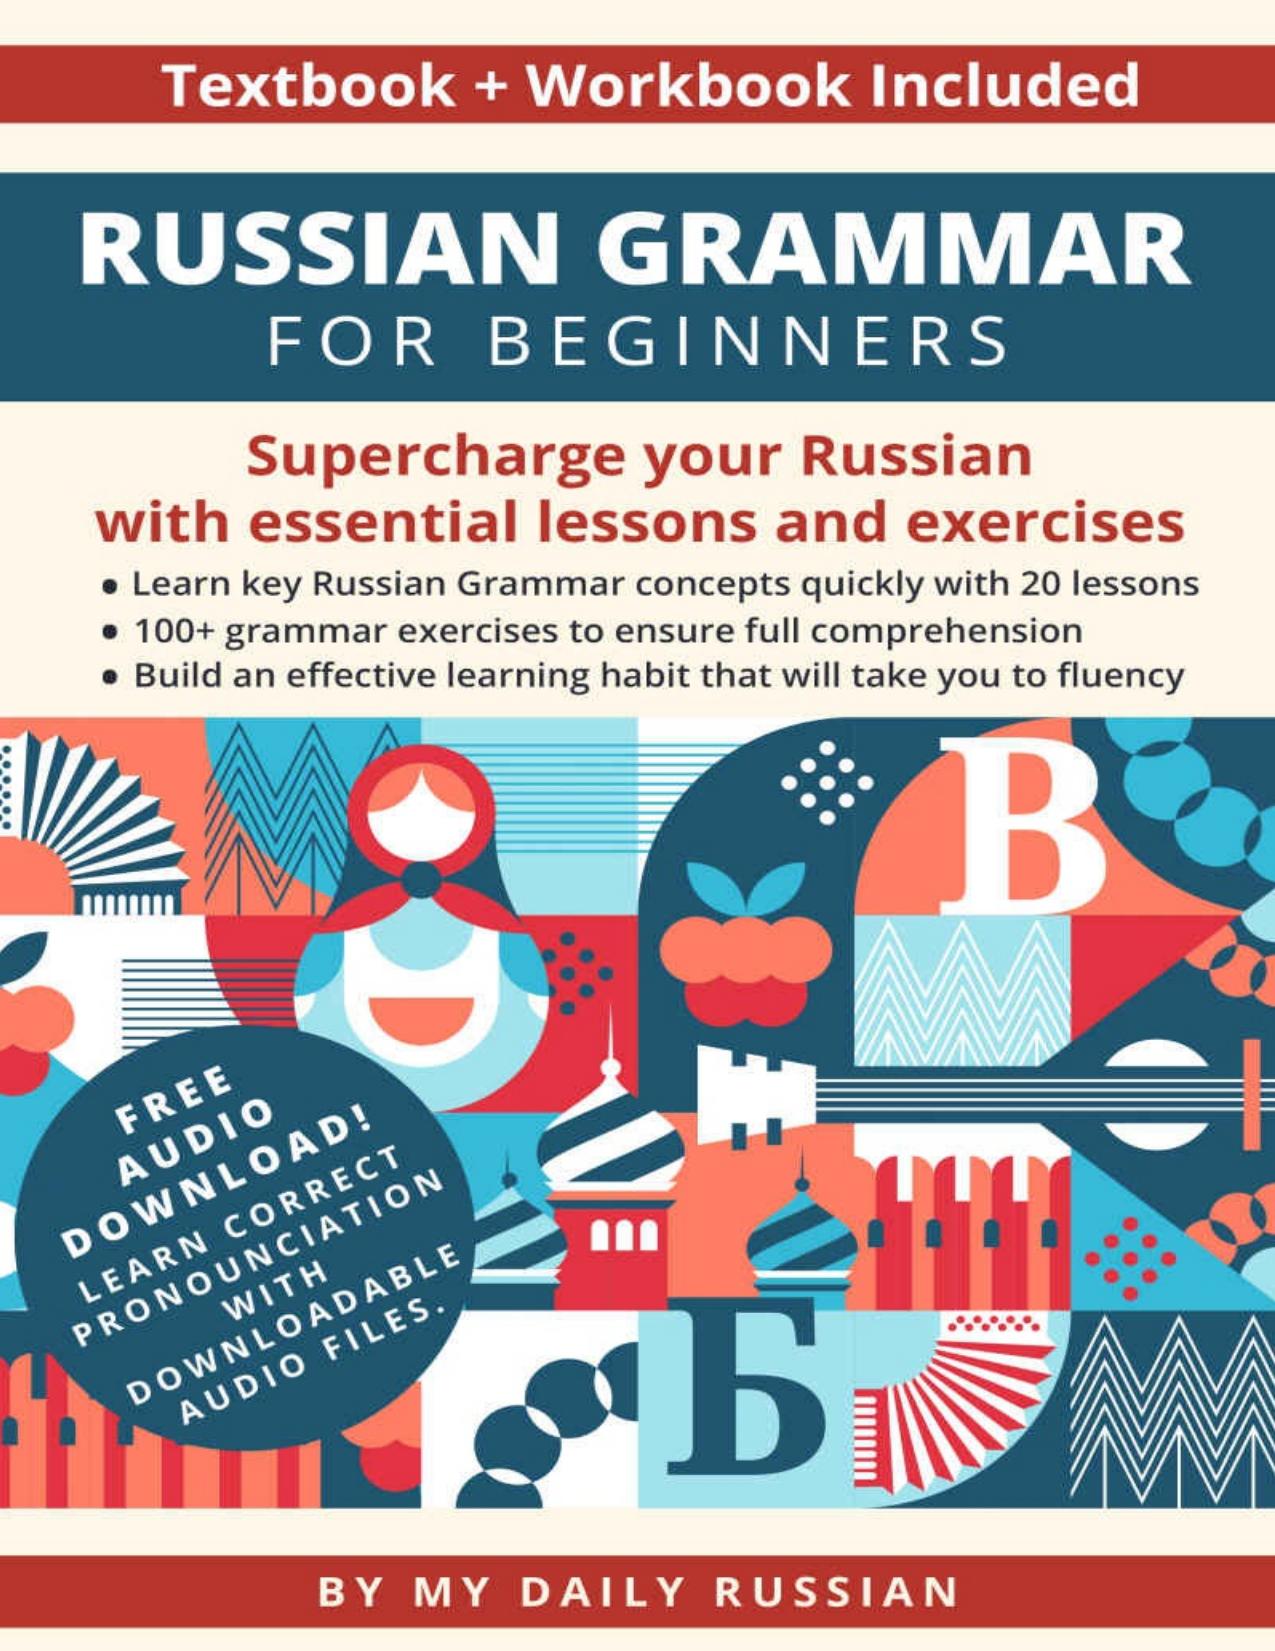 Russian Grammar for Beginners Textbook + Workbook Included: Supercharge Your Russian With Essential Lessons and Exercises by My Daily Russian